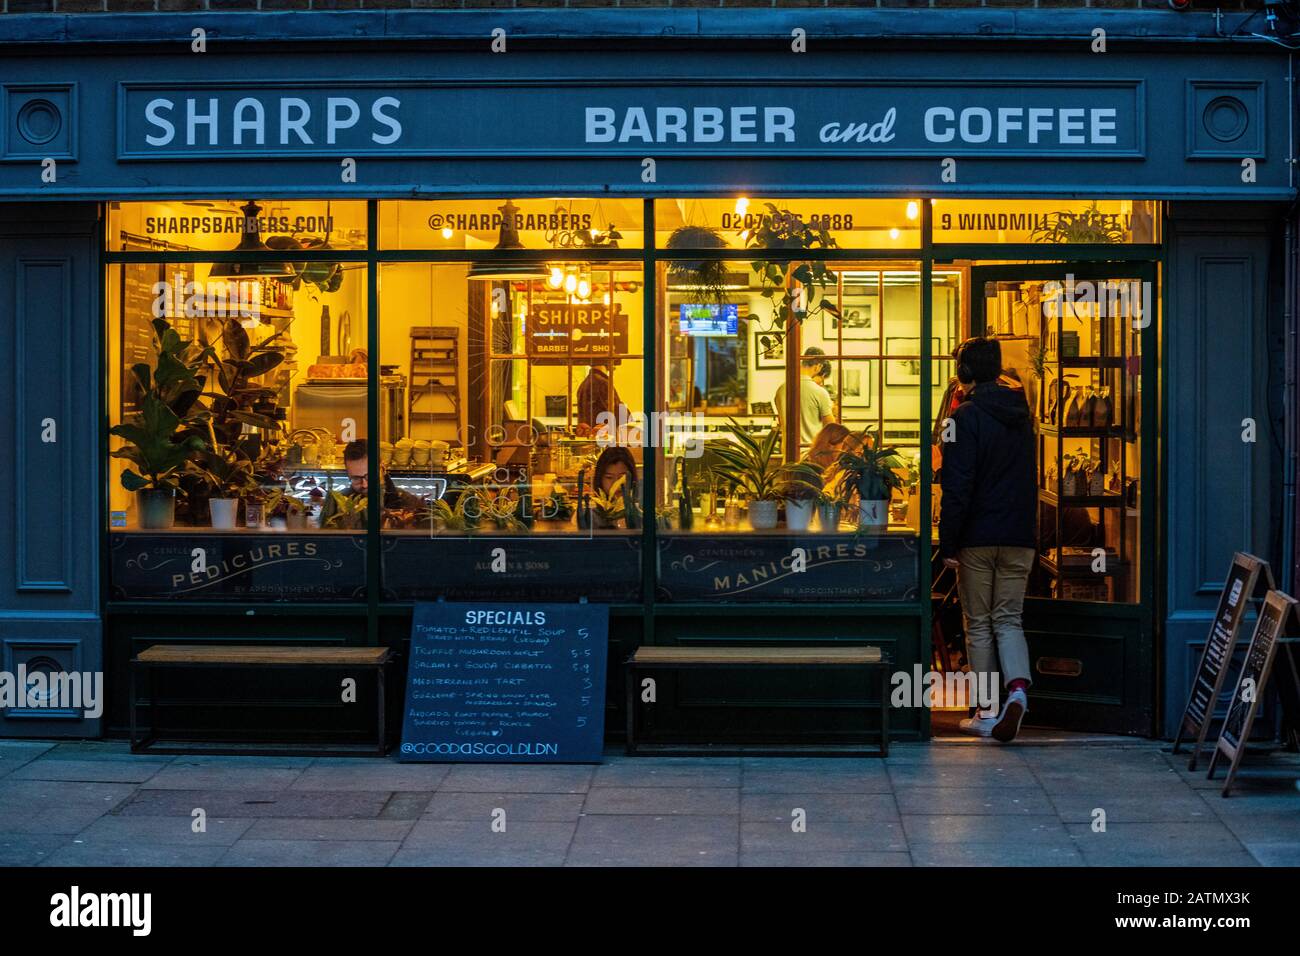 Combined Barber Shop and Coffee Shop London - Sharps Barber and Coffee Shop in Windmill St, Fitzrovia, London. Stockfoto